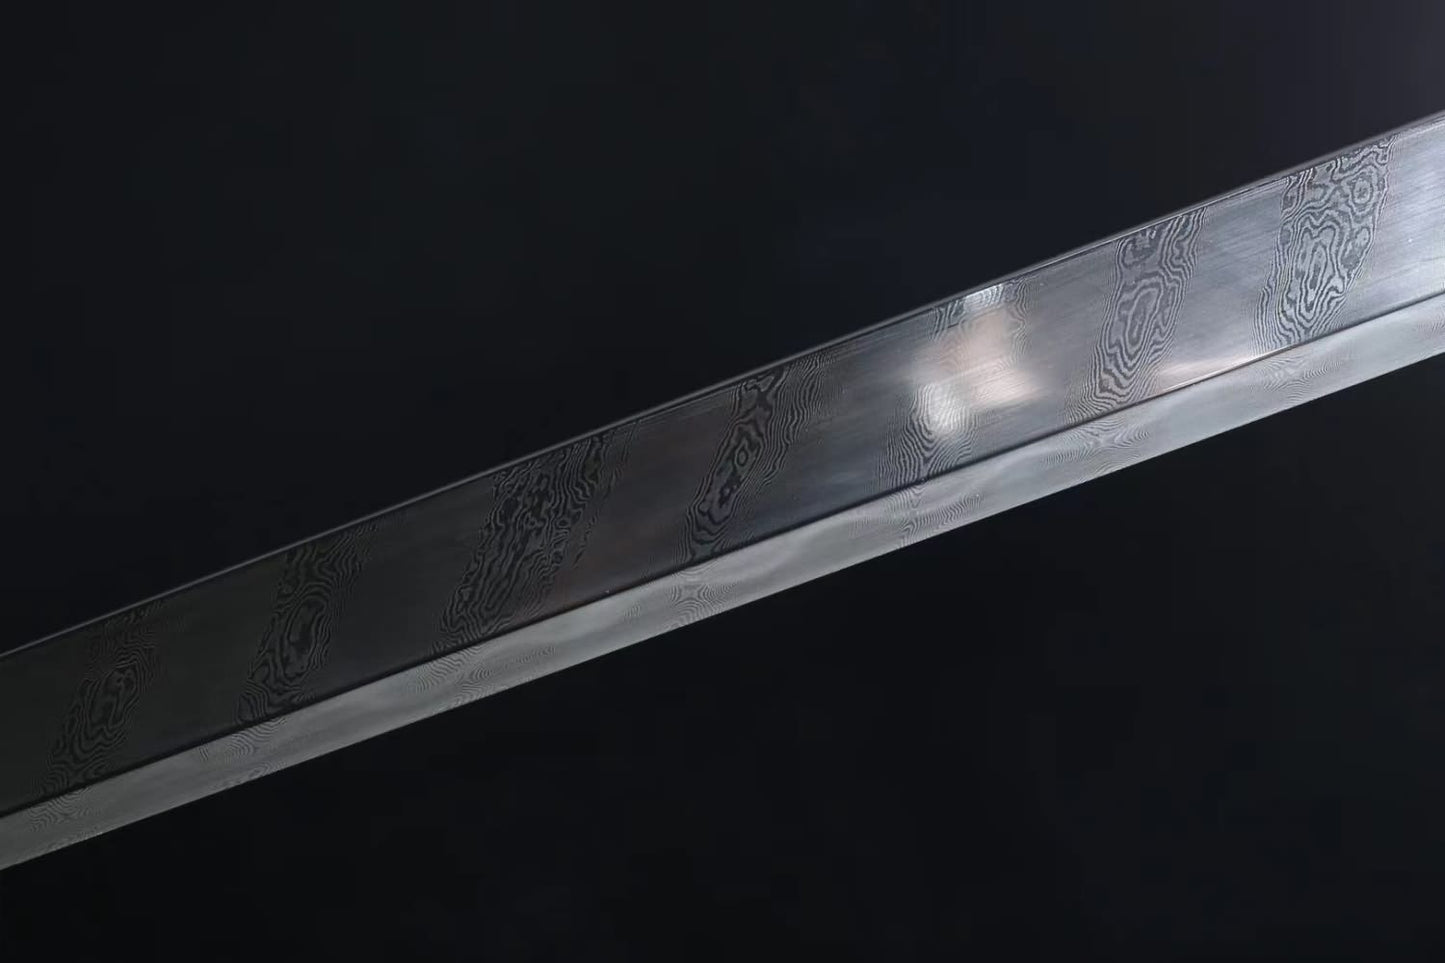 Tang Dao Sword-Hand-Forged Damascus Steel Blade,Ebony Scabbard,Brass Fittings